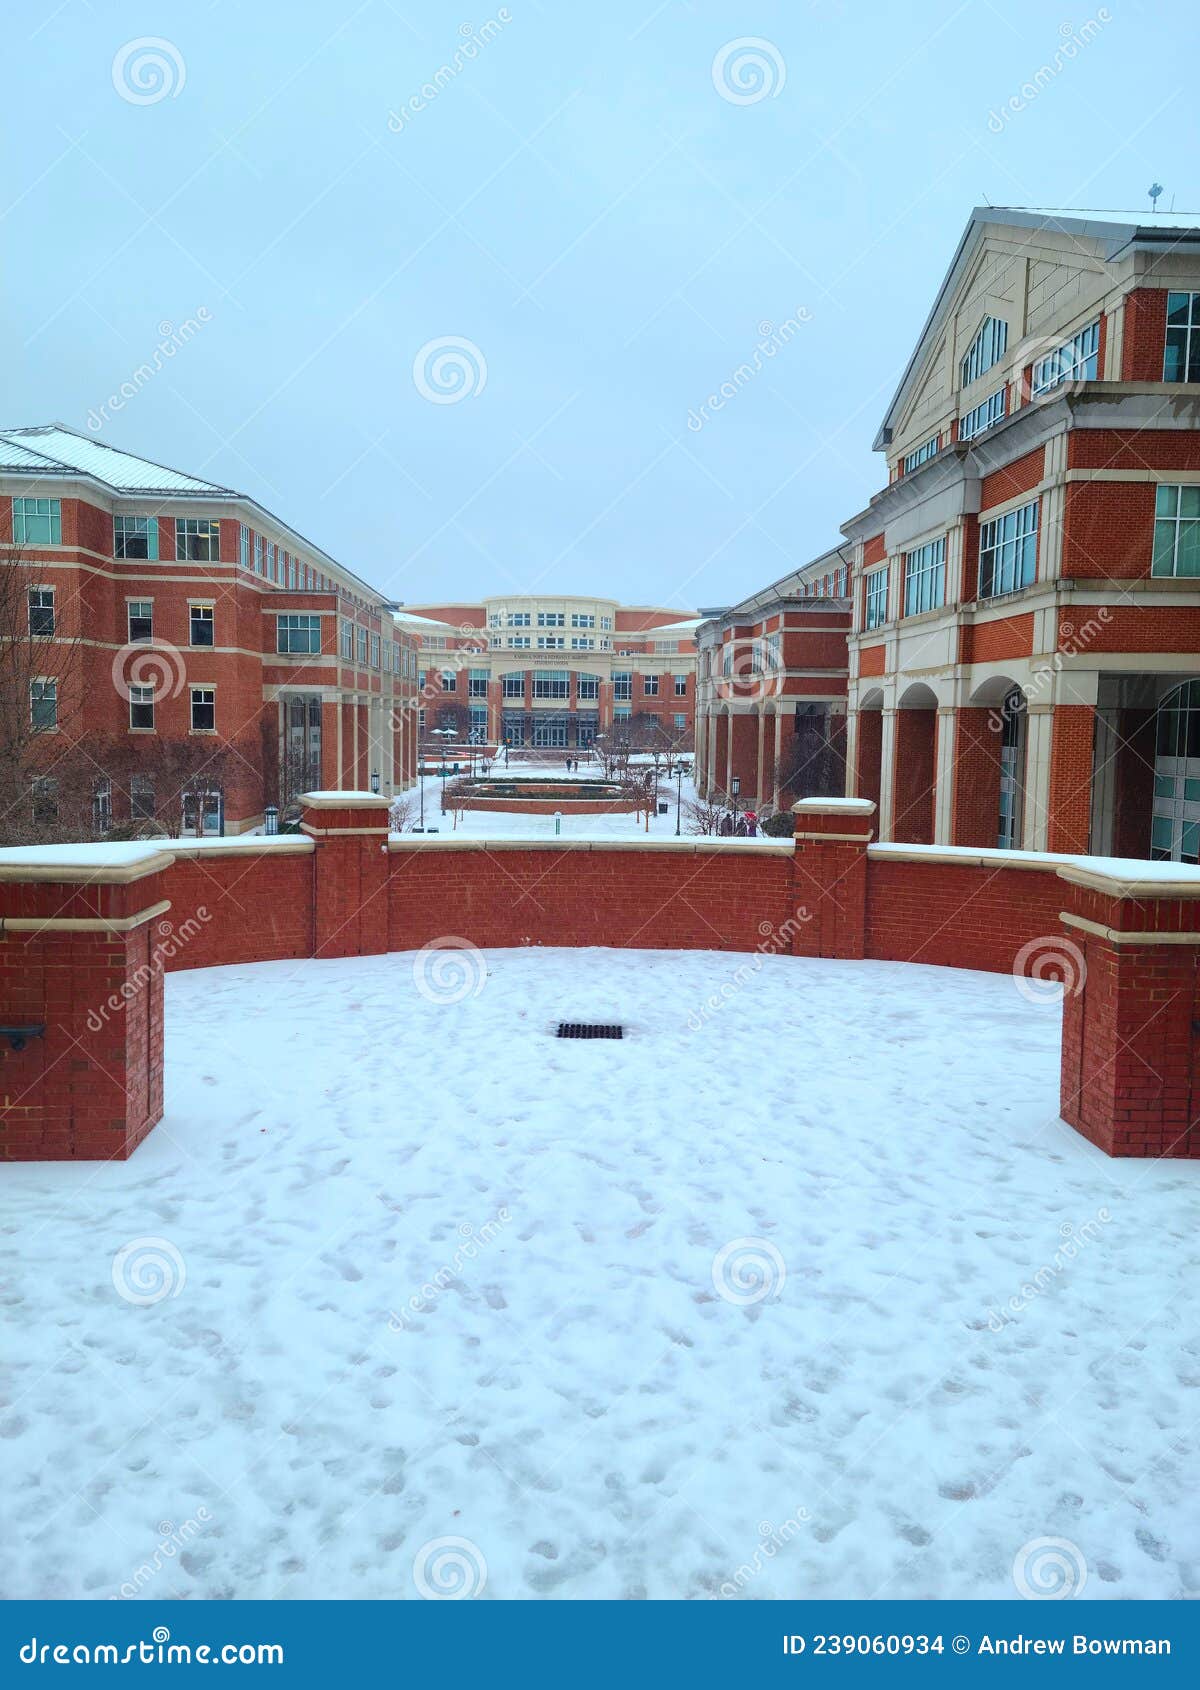 the popp martin student union at unc charlotte in the snow